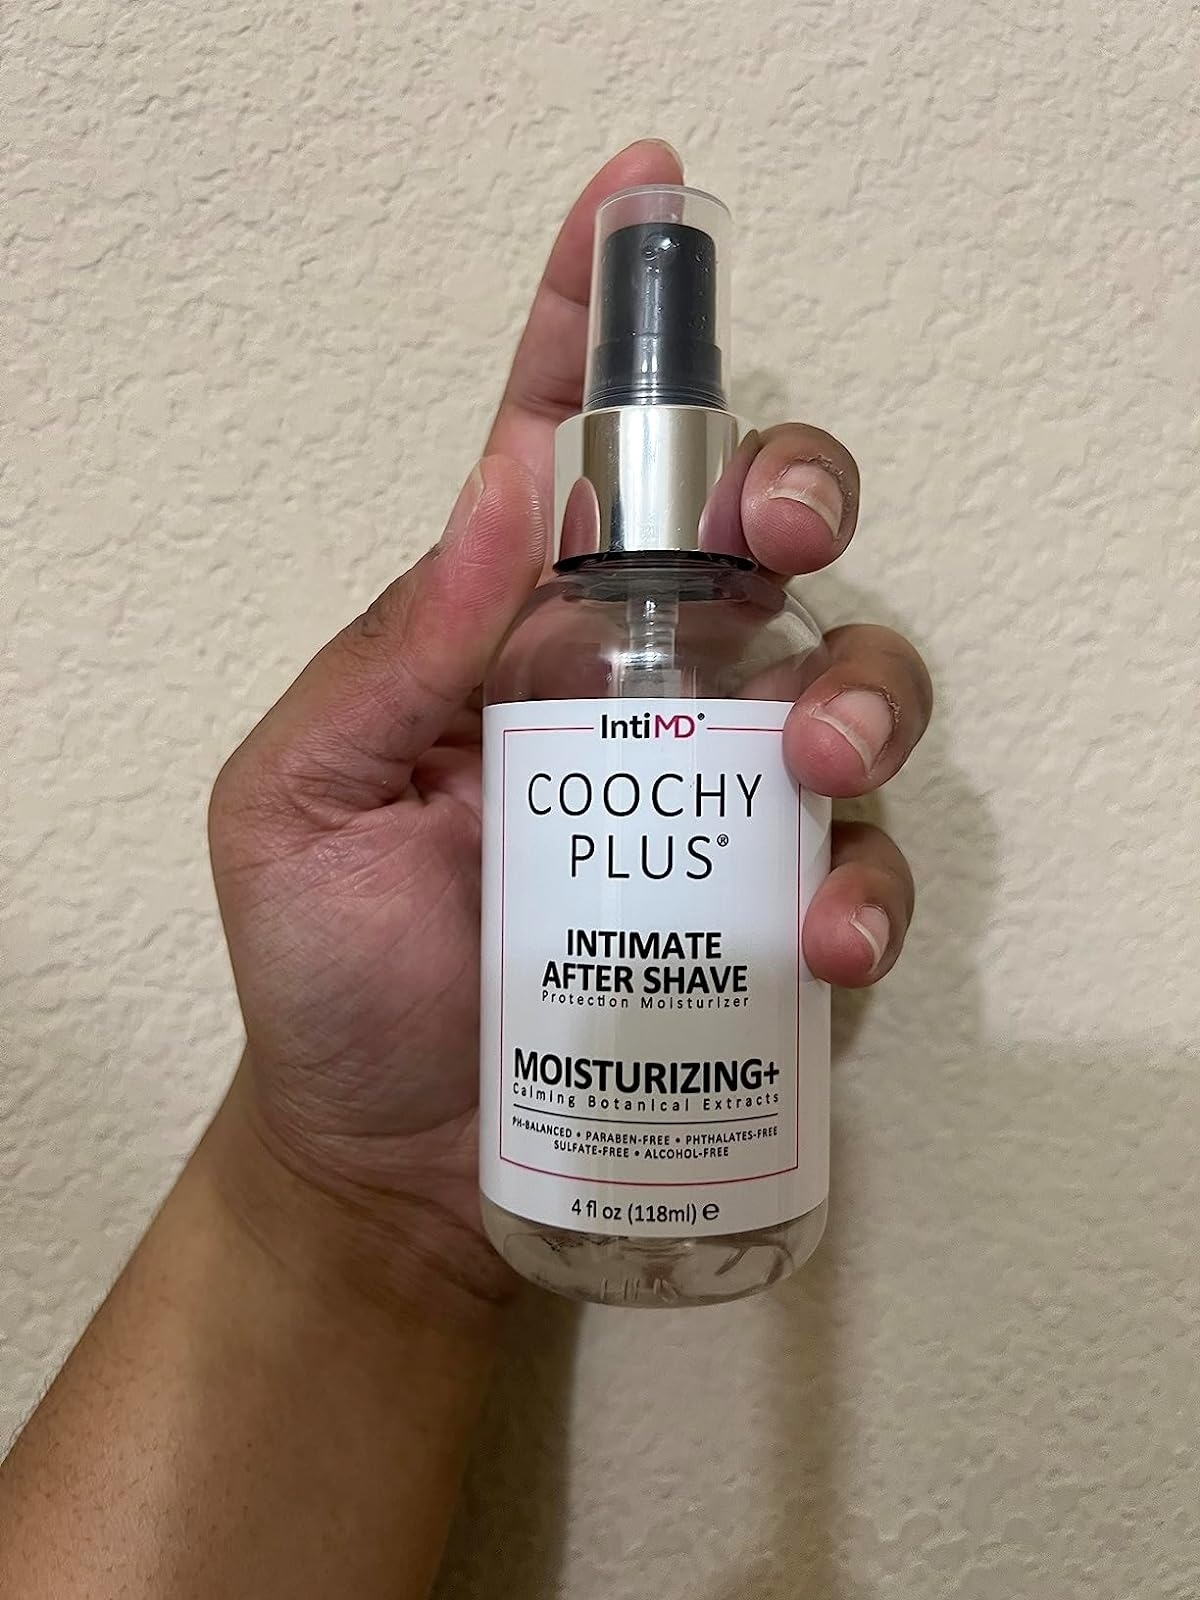 Hand holding IntiMD Coochy Plus Intimate Moisturizing After Shave in a clear bottle with white label